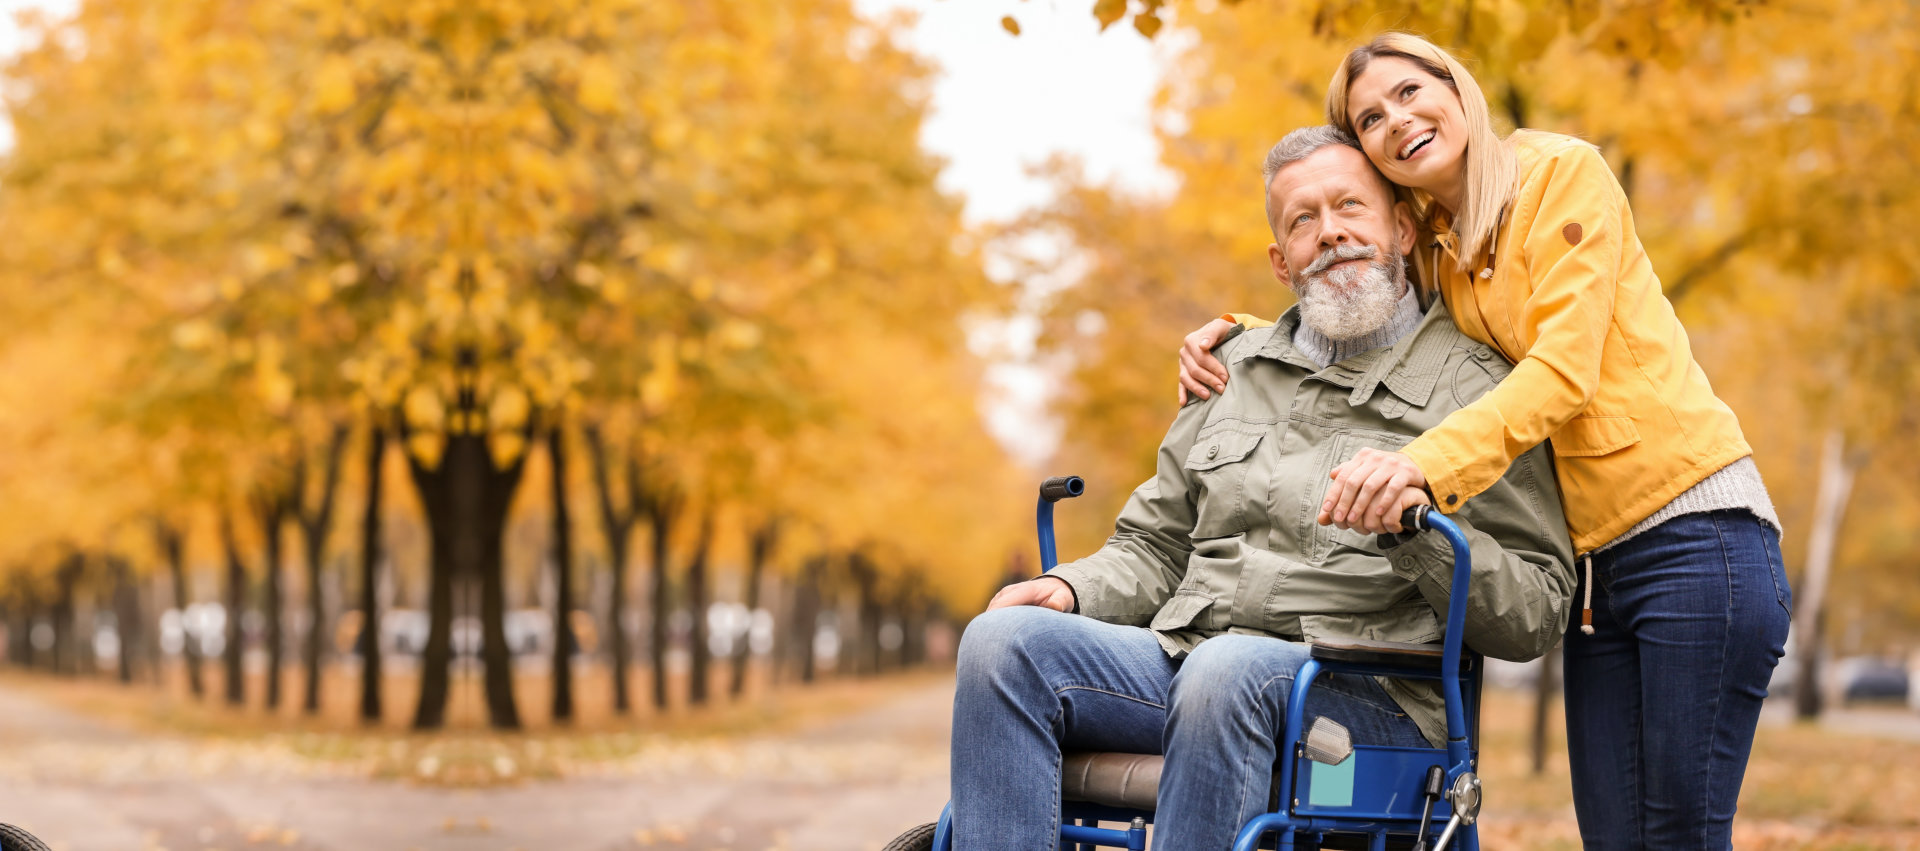 senior man in wheelchair with young woman outdoors